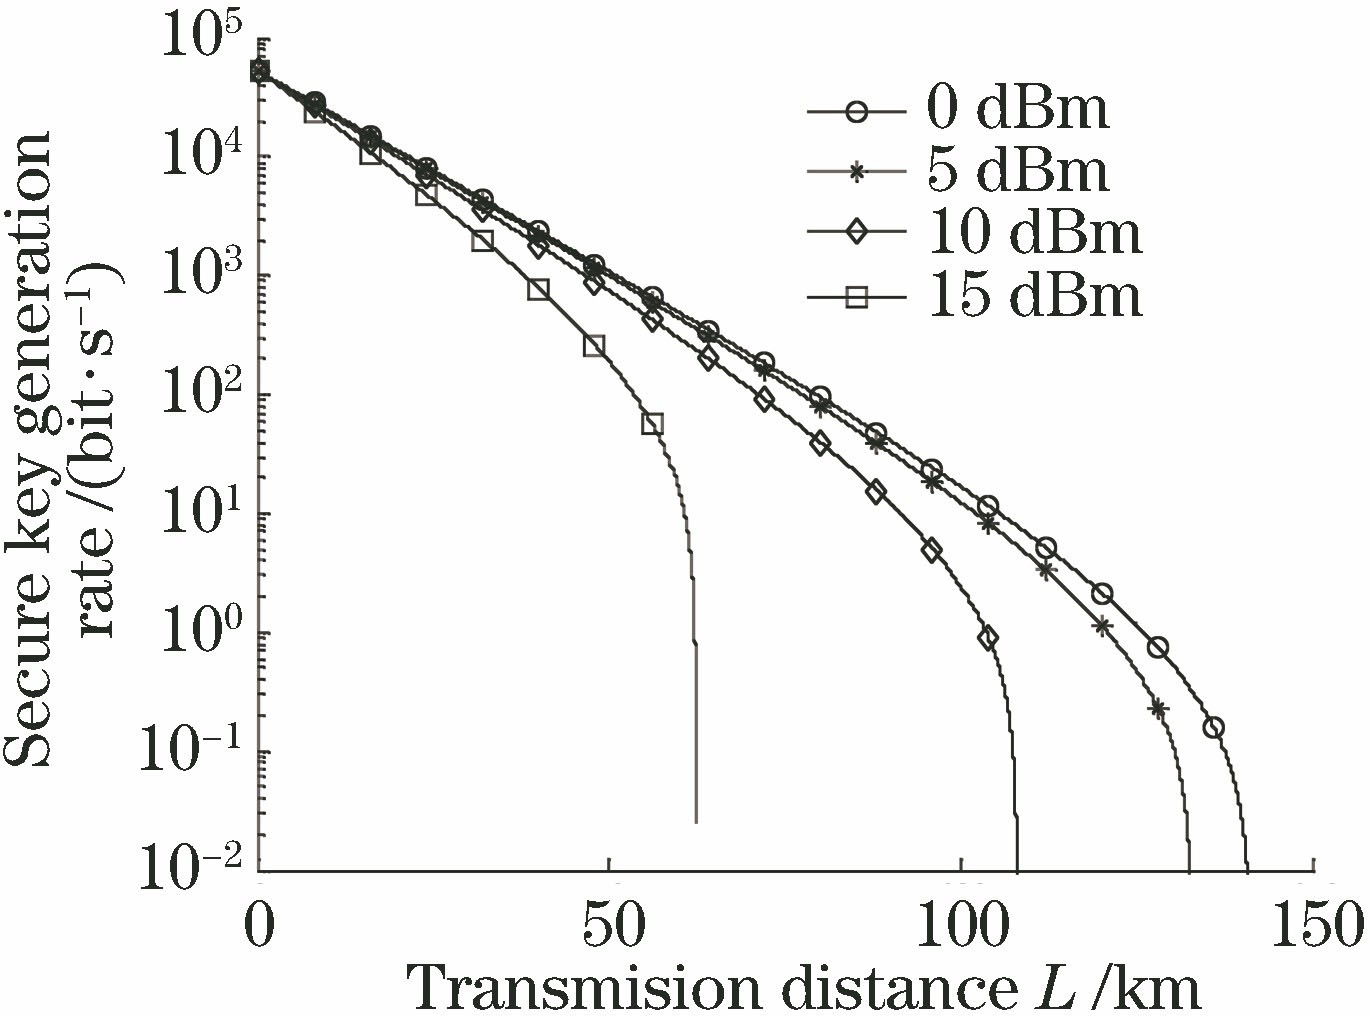 Relationship between key generation rate and transmission distance L obtained by co-transmission of one quantum channel and classical signals with different incident powers